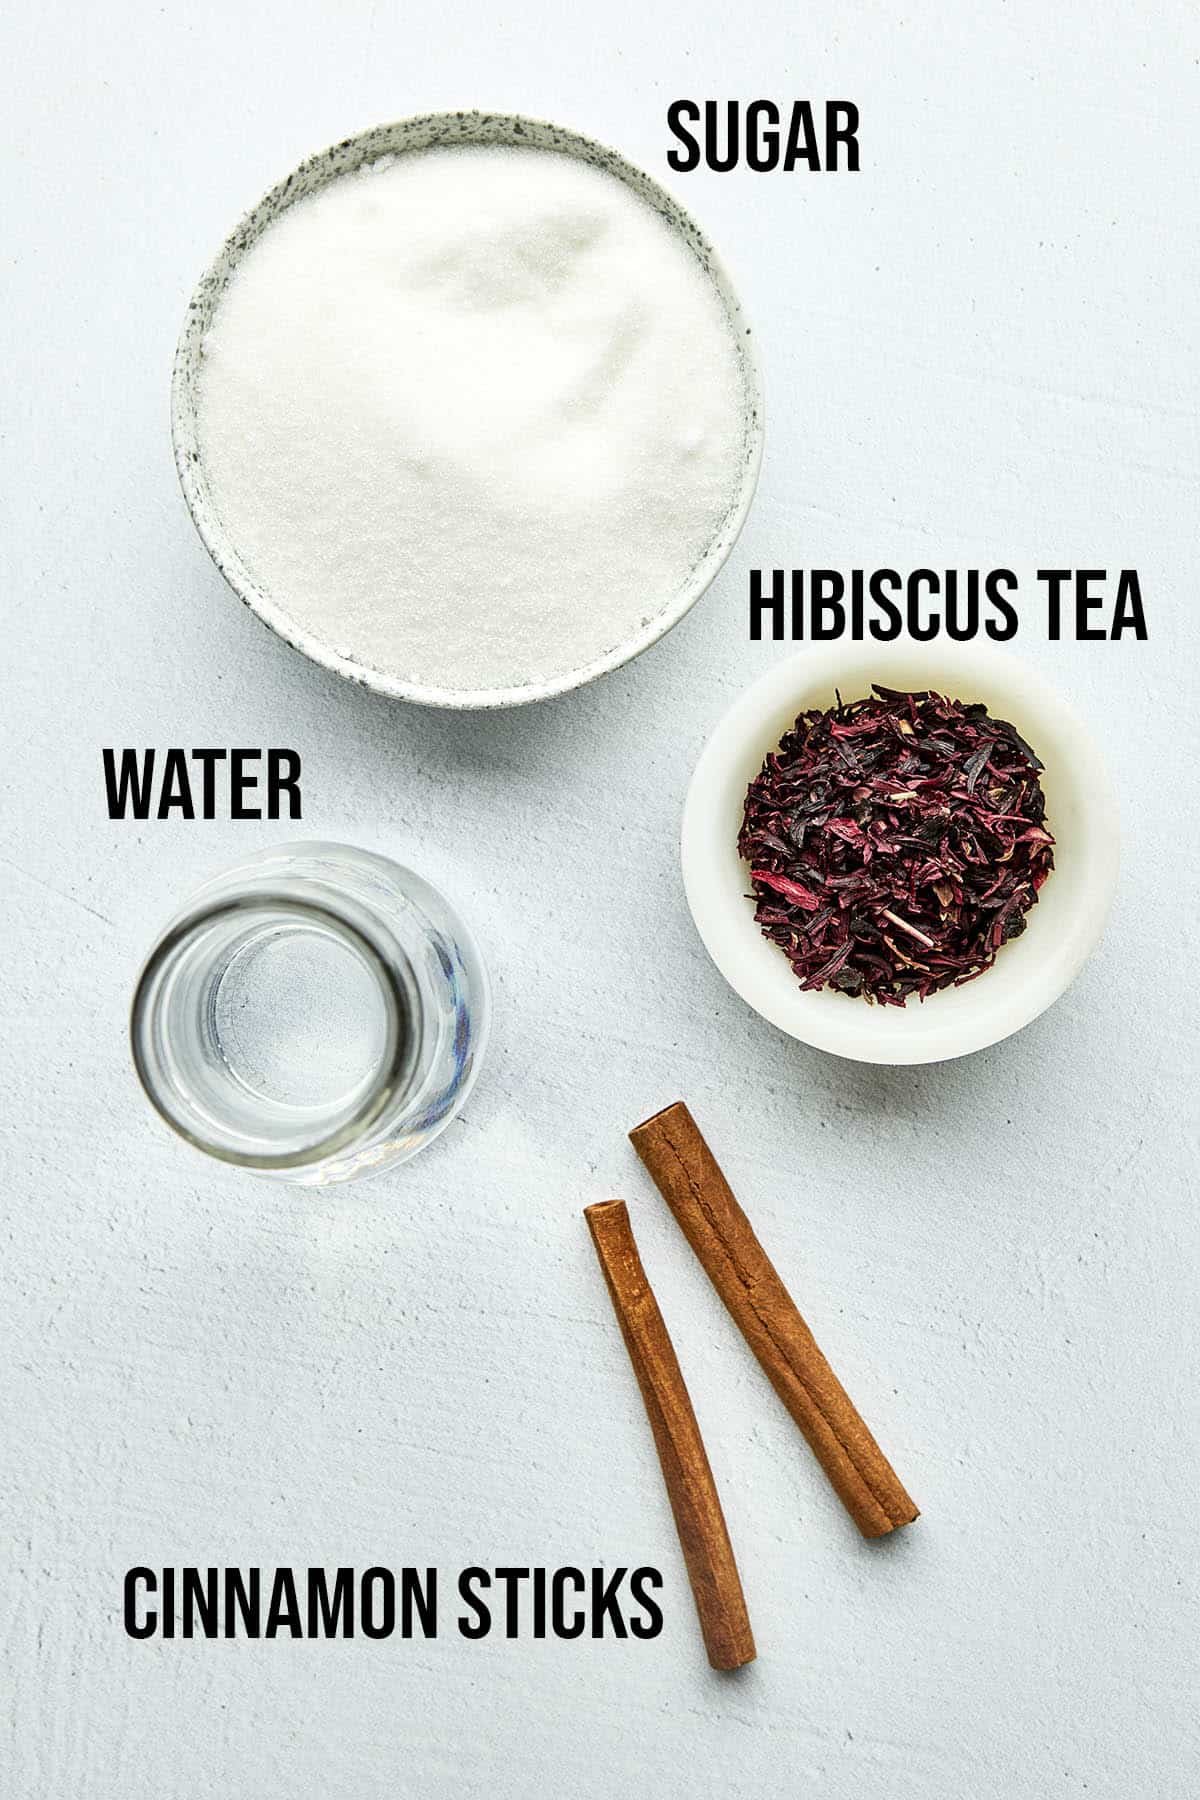 Hibiscus syrup ingredients with labels.